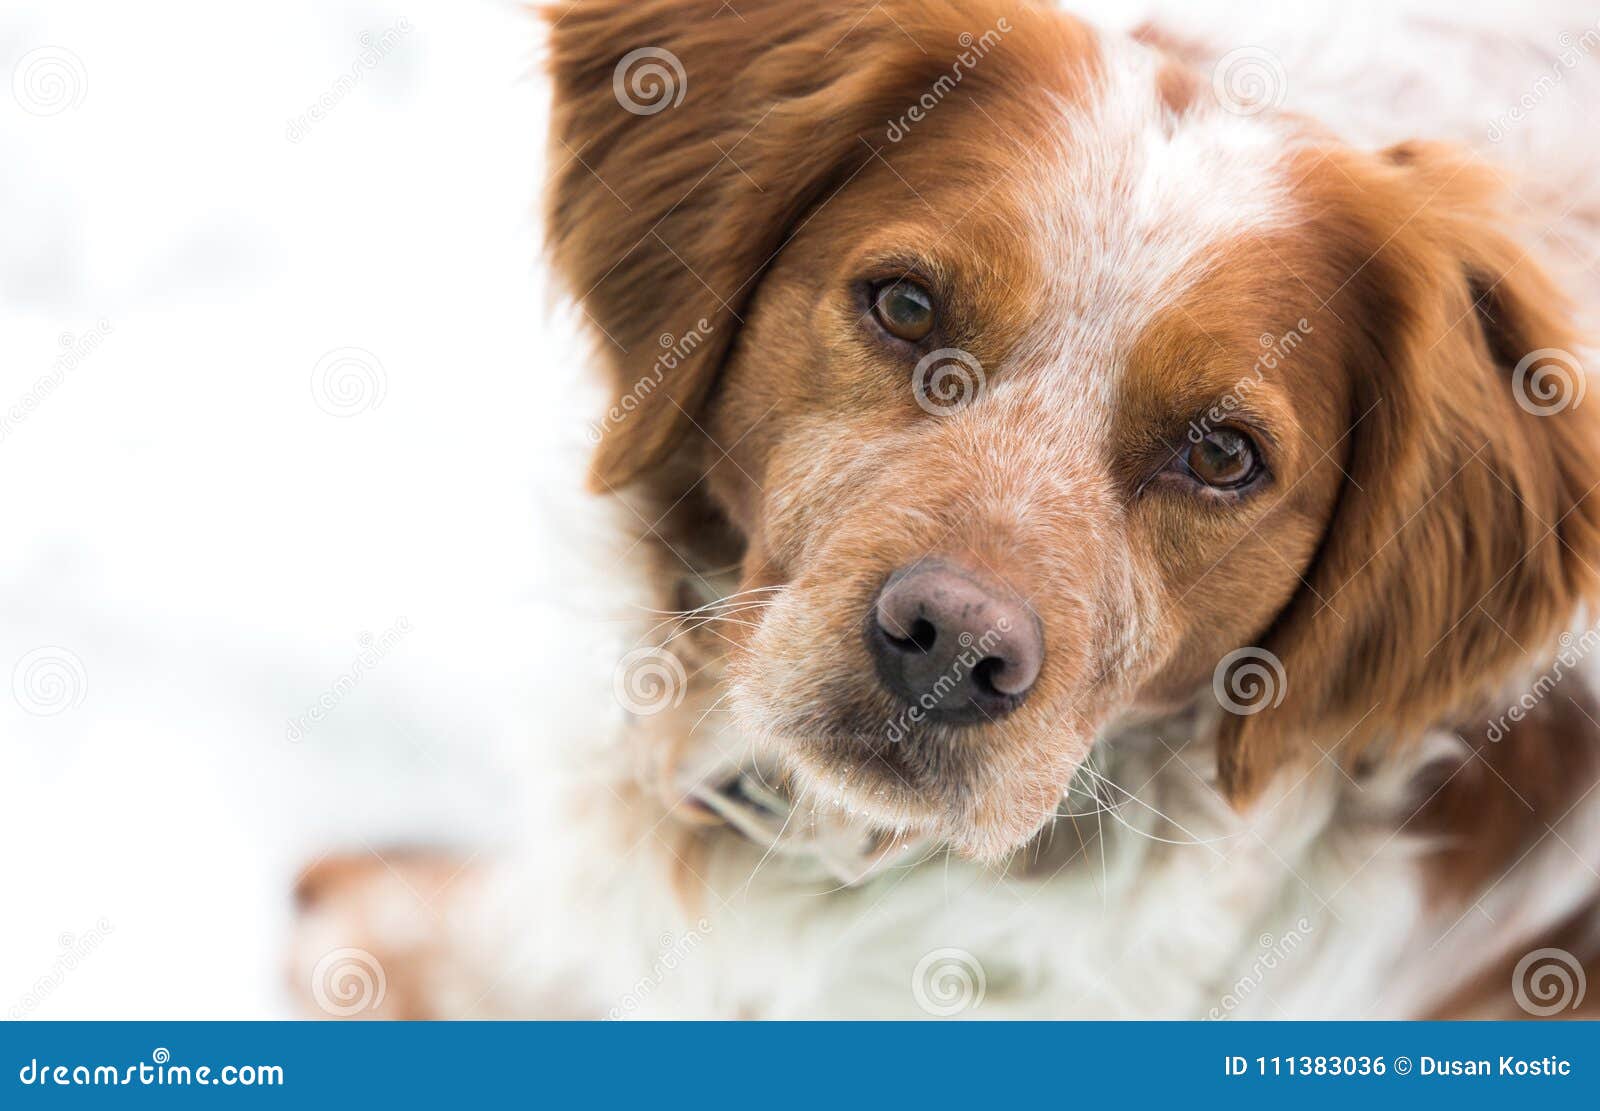 Orange And White French Brittany Spaniel Stock Photo Image Of Brittany Setter 111383036